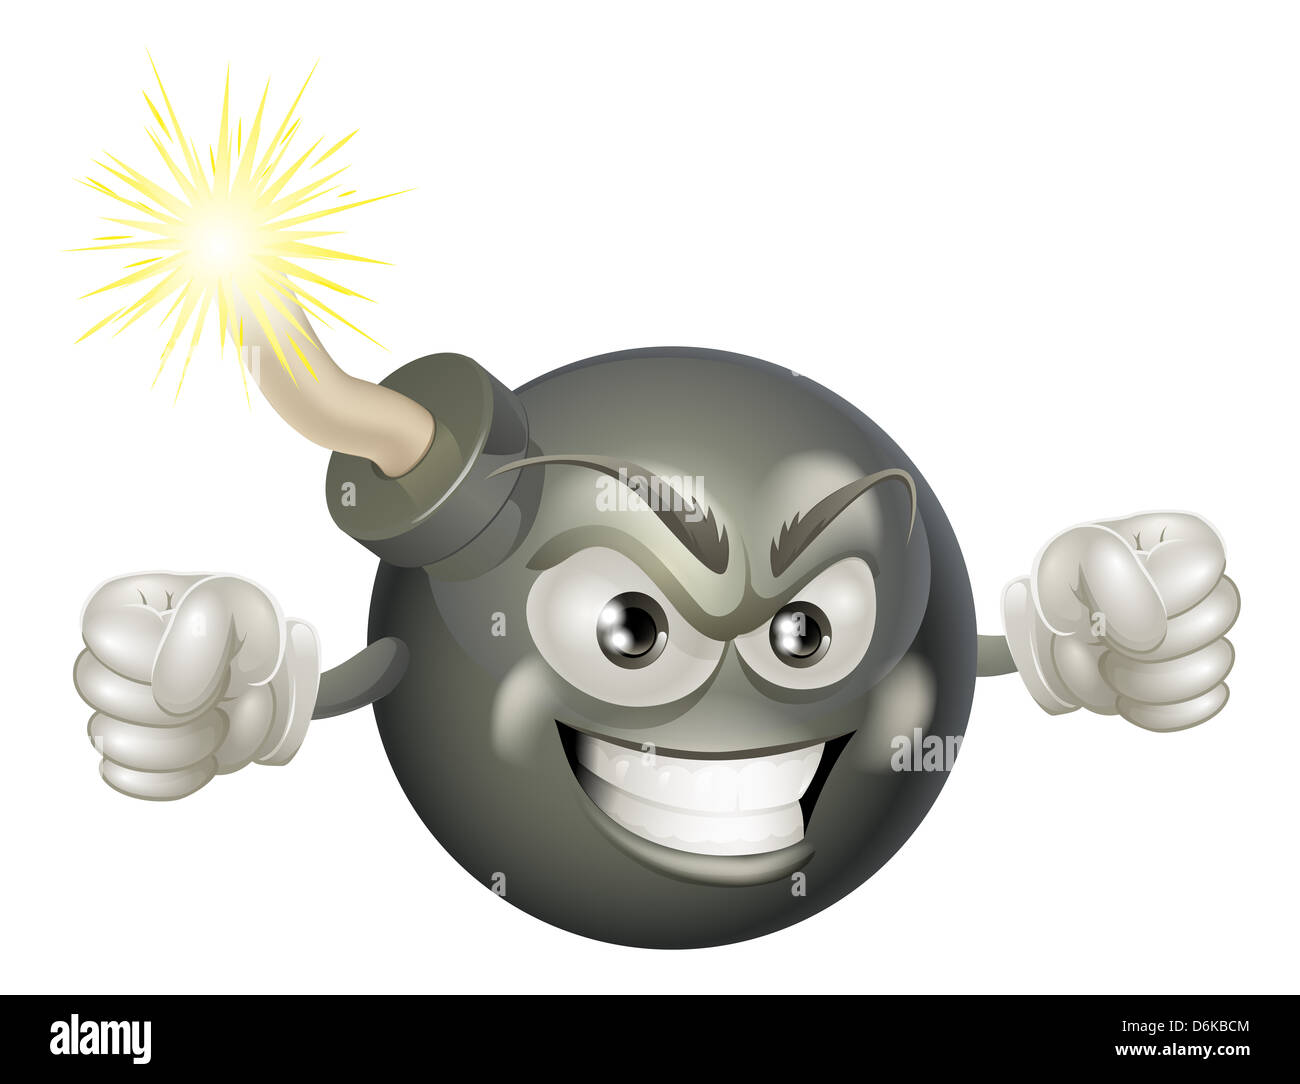 An illustration of mean or angry looking cartoon bomb character with a lit fuse Stock Photo